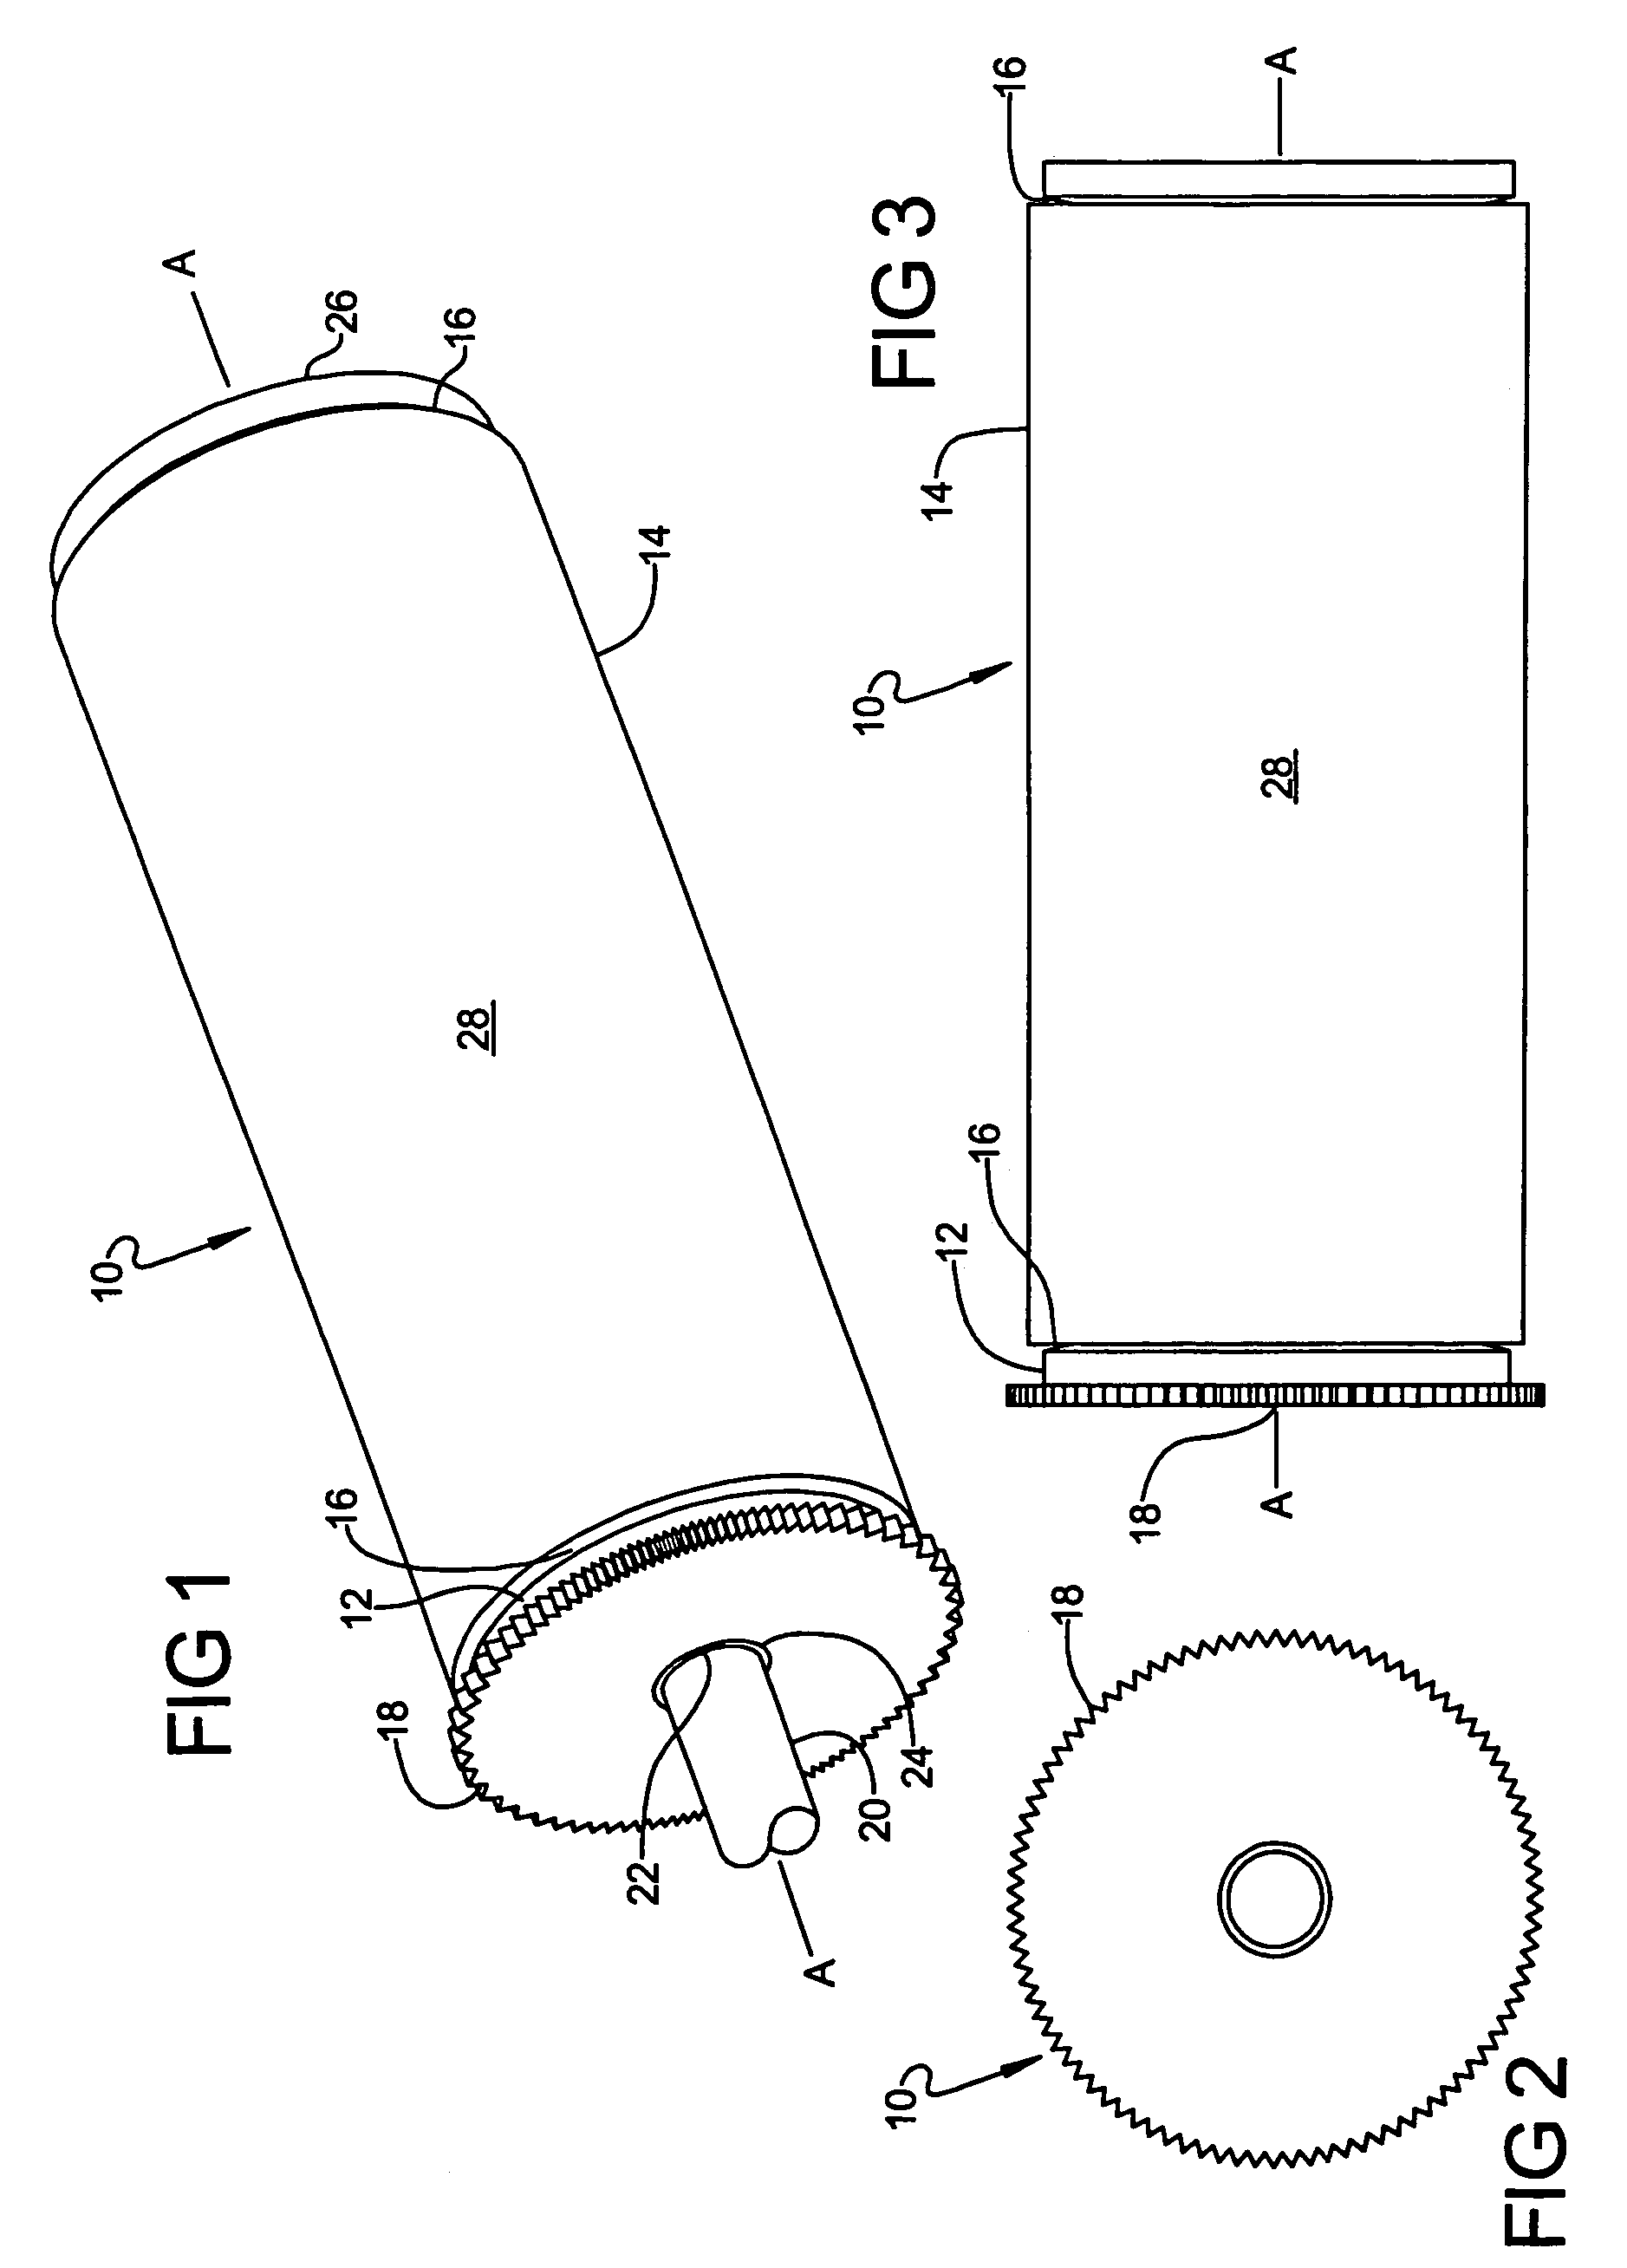 Apparatus and method of enhancing printing press cylinders